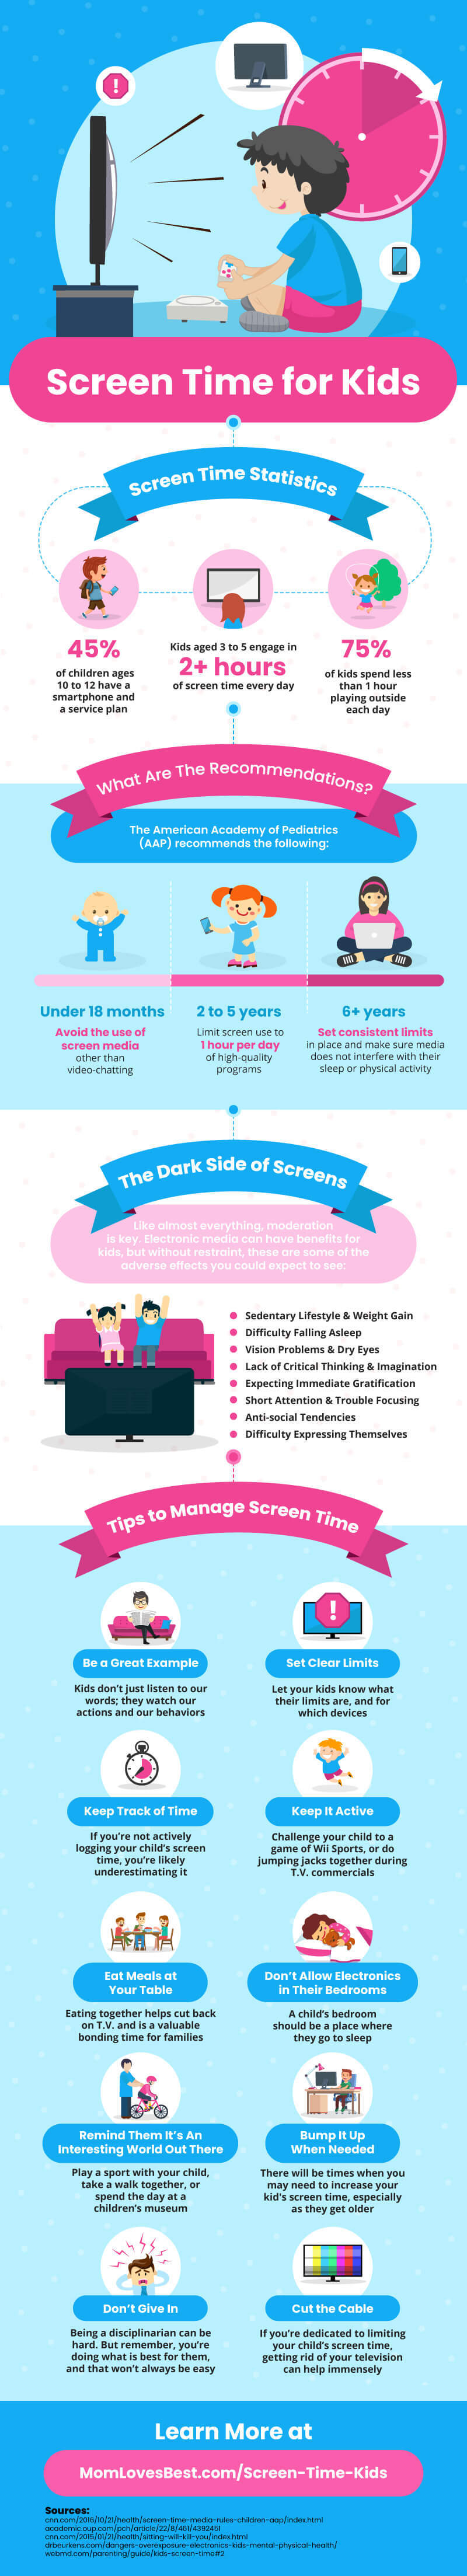 Screen Time and Kids